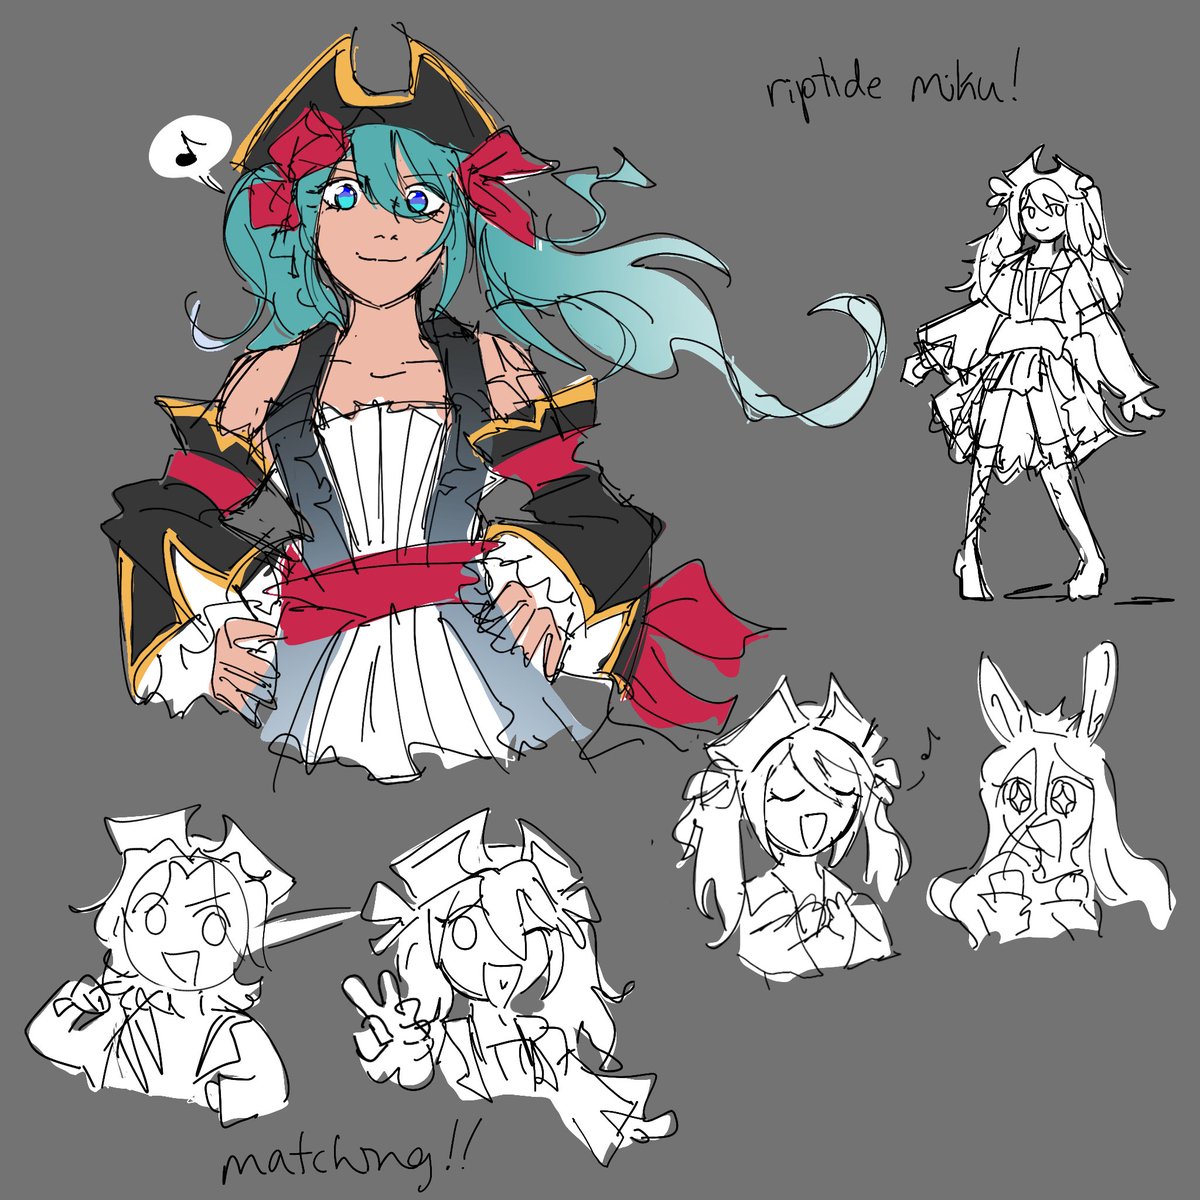 Had a bad day so i treated myself to riptide miku sketch page. She should be in i think #jrwi #HatsuneMiku #jrwiriptide #jrwifanart